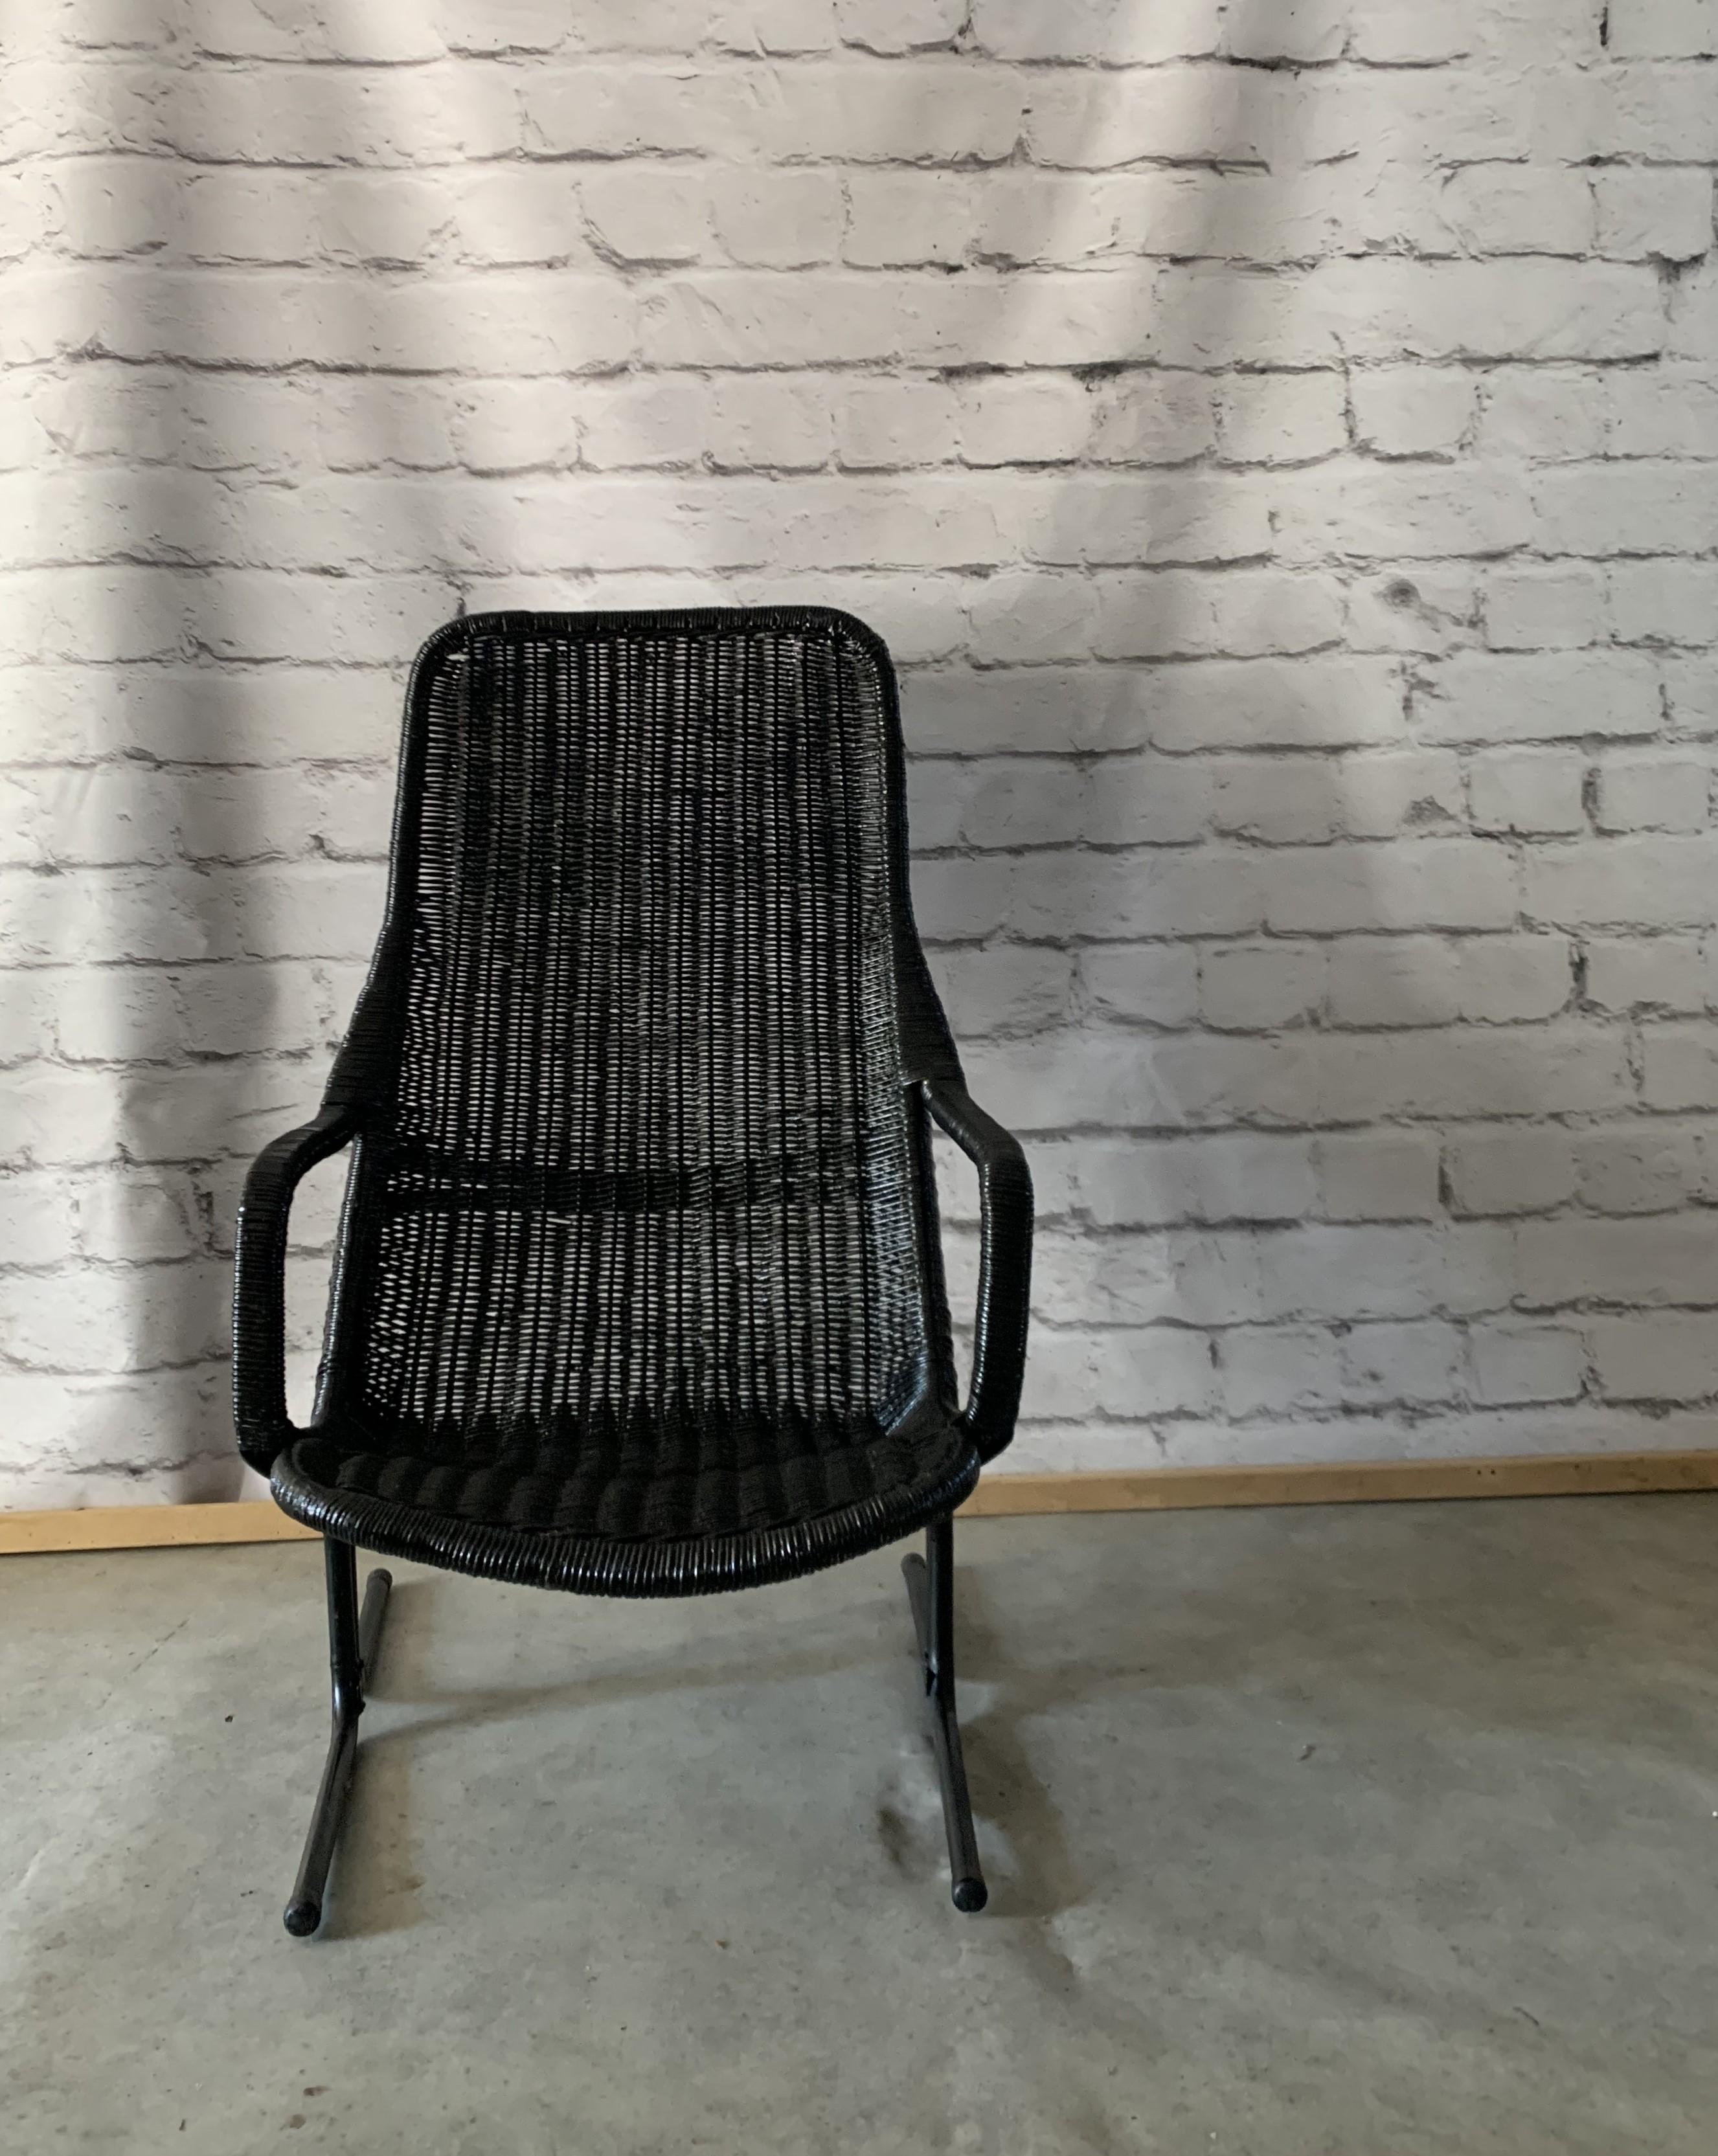 Beautiful 514 Sliedregt easy chair in rattan and steel. Traditional rattan with modern metal frame. The 514C model has become an icon of Dutch design. The rattan and metal parts are in good condition. Painted black.